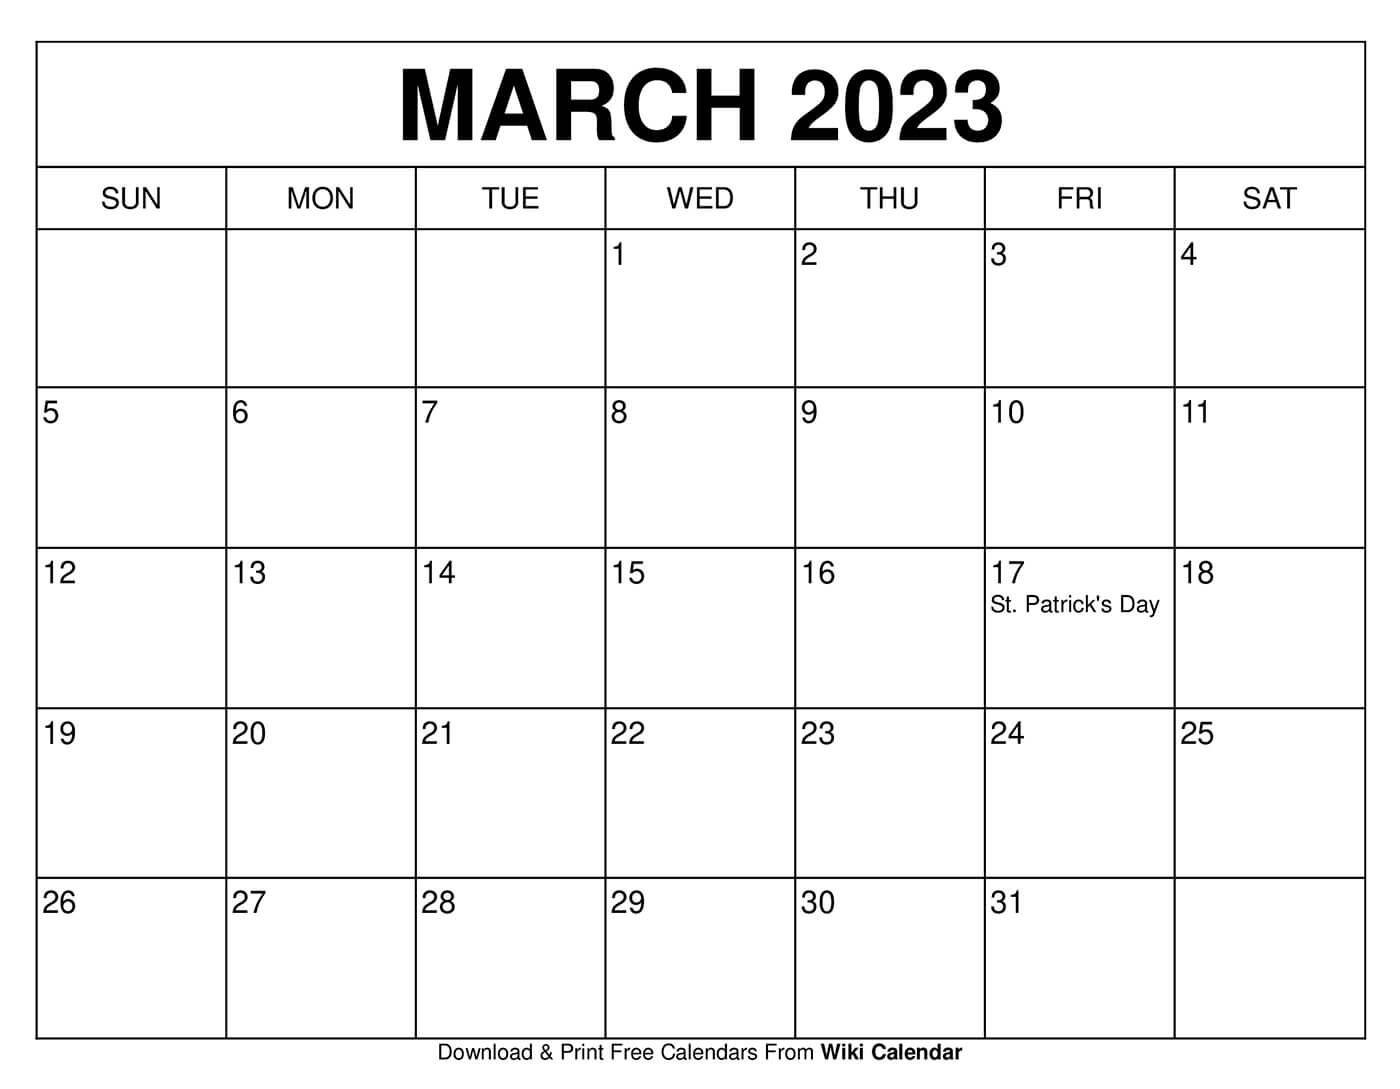 Download And Printable Calendars For 2023 - Wiki Calendar